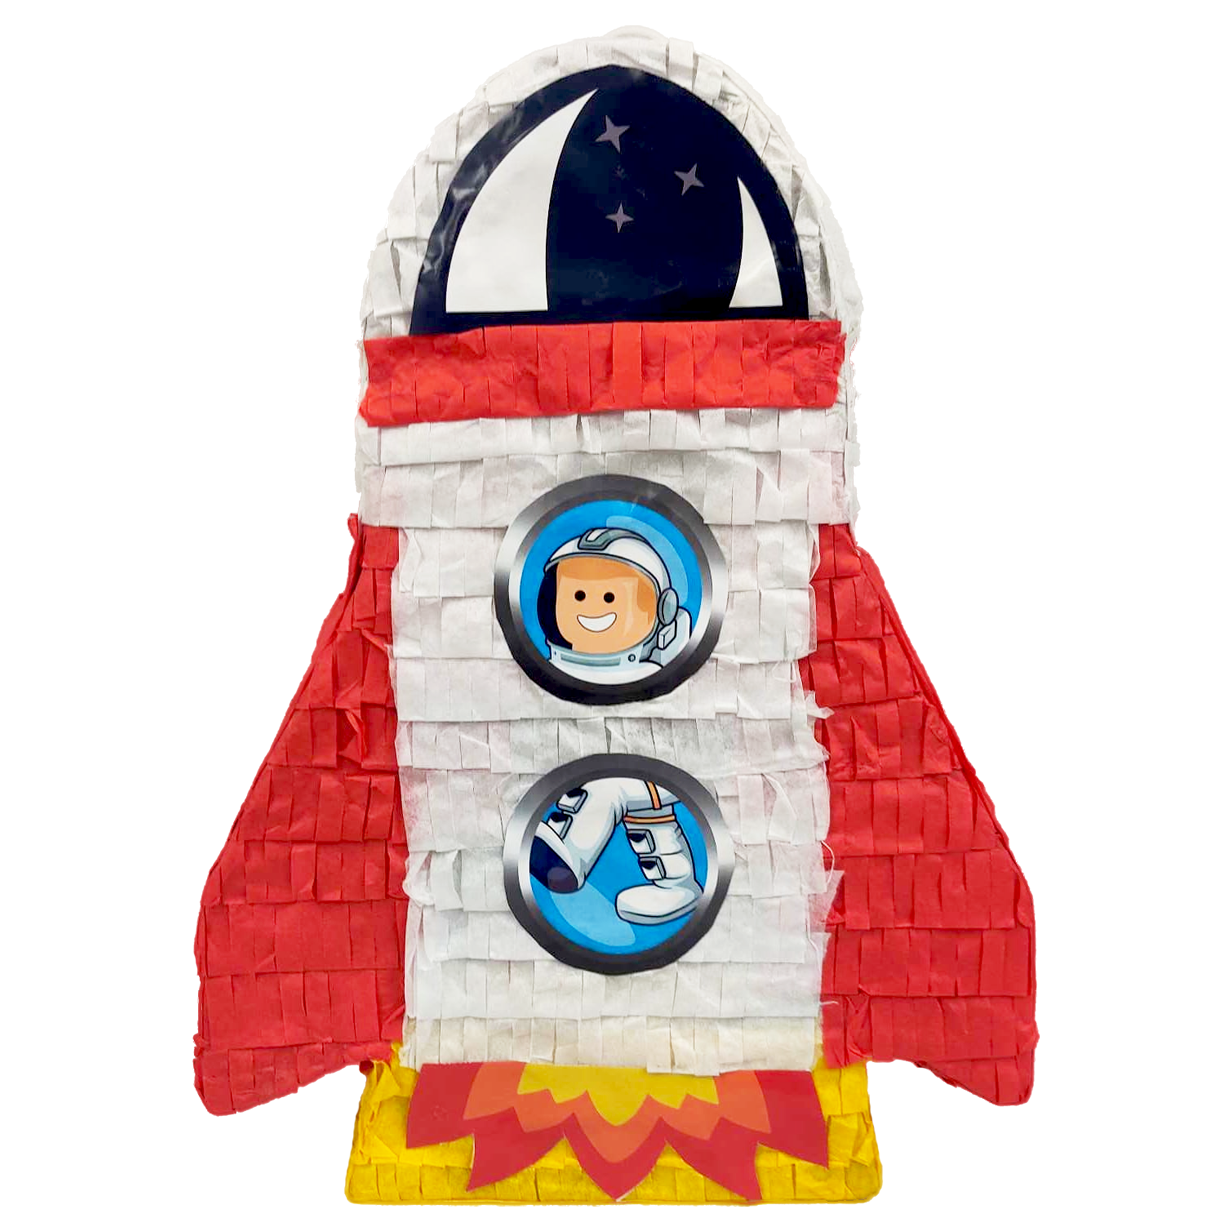 Space Rocket Pinata for 4th of July Party Celebrations